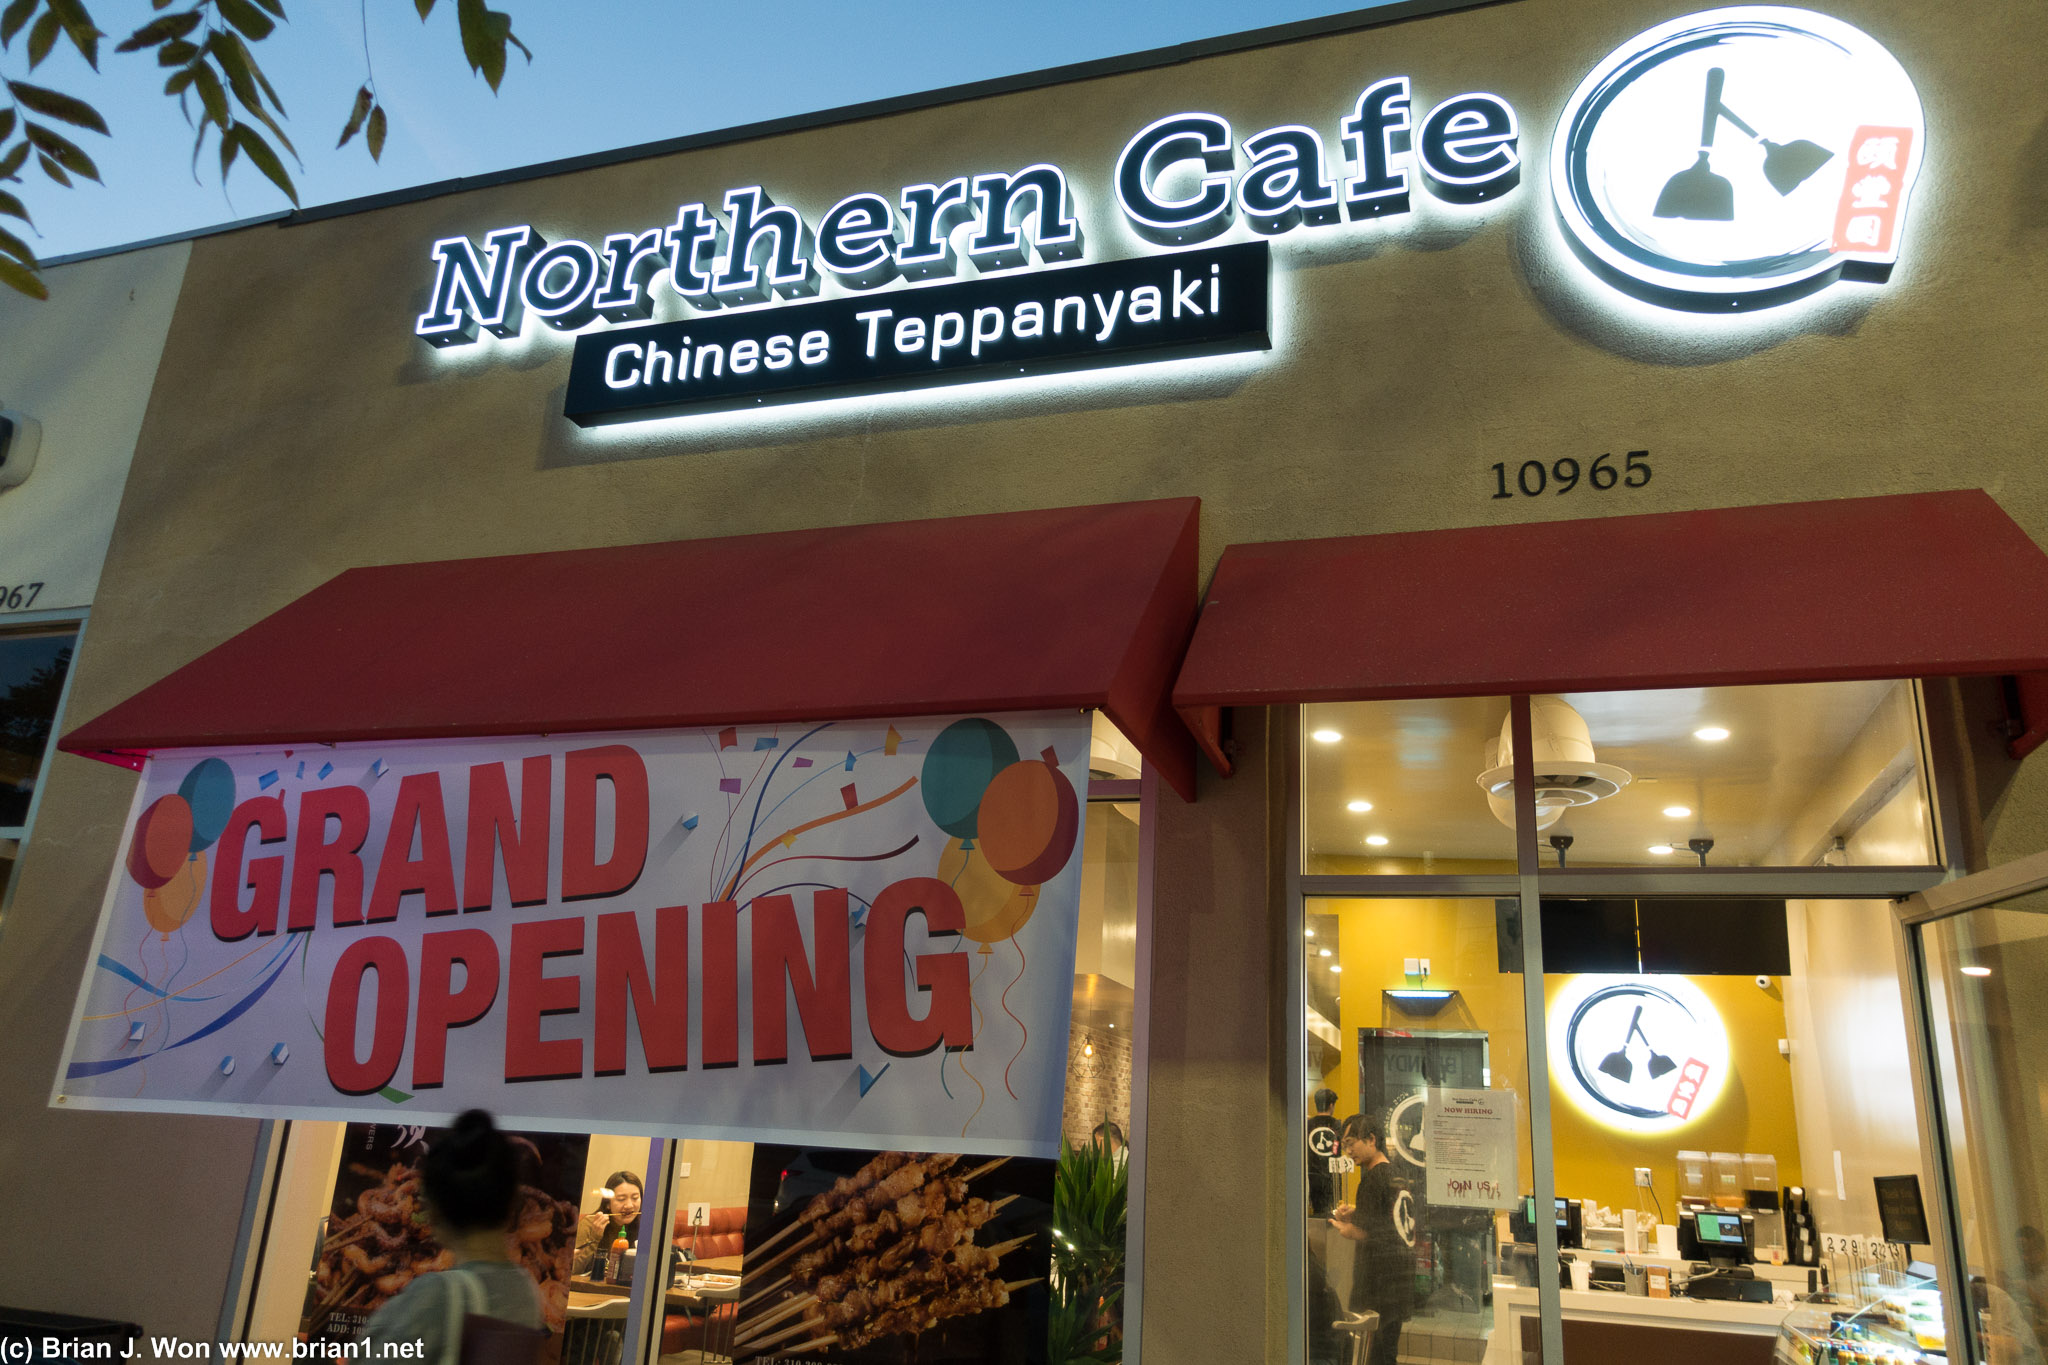 Northern Cafe's second location in Westwood.